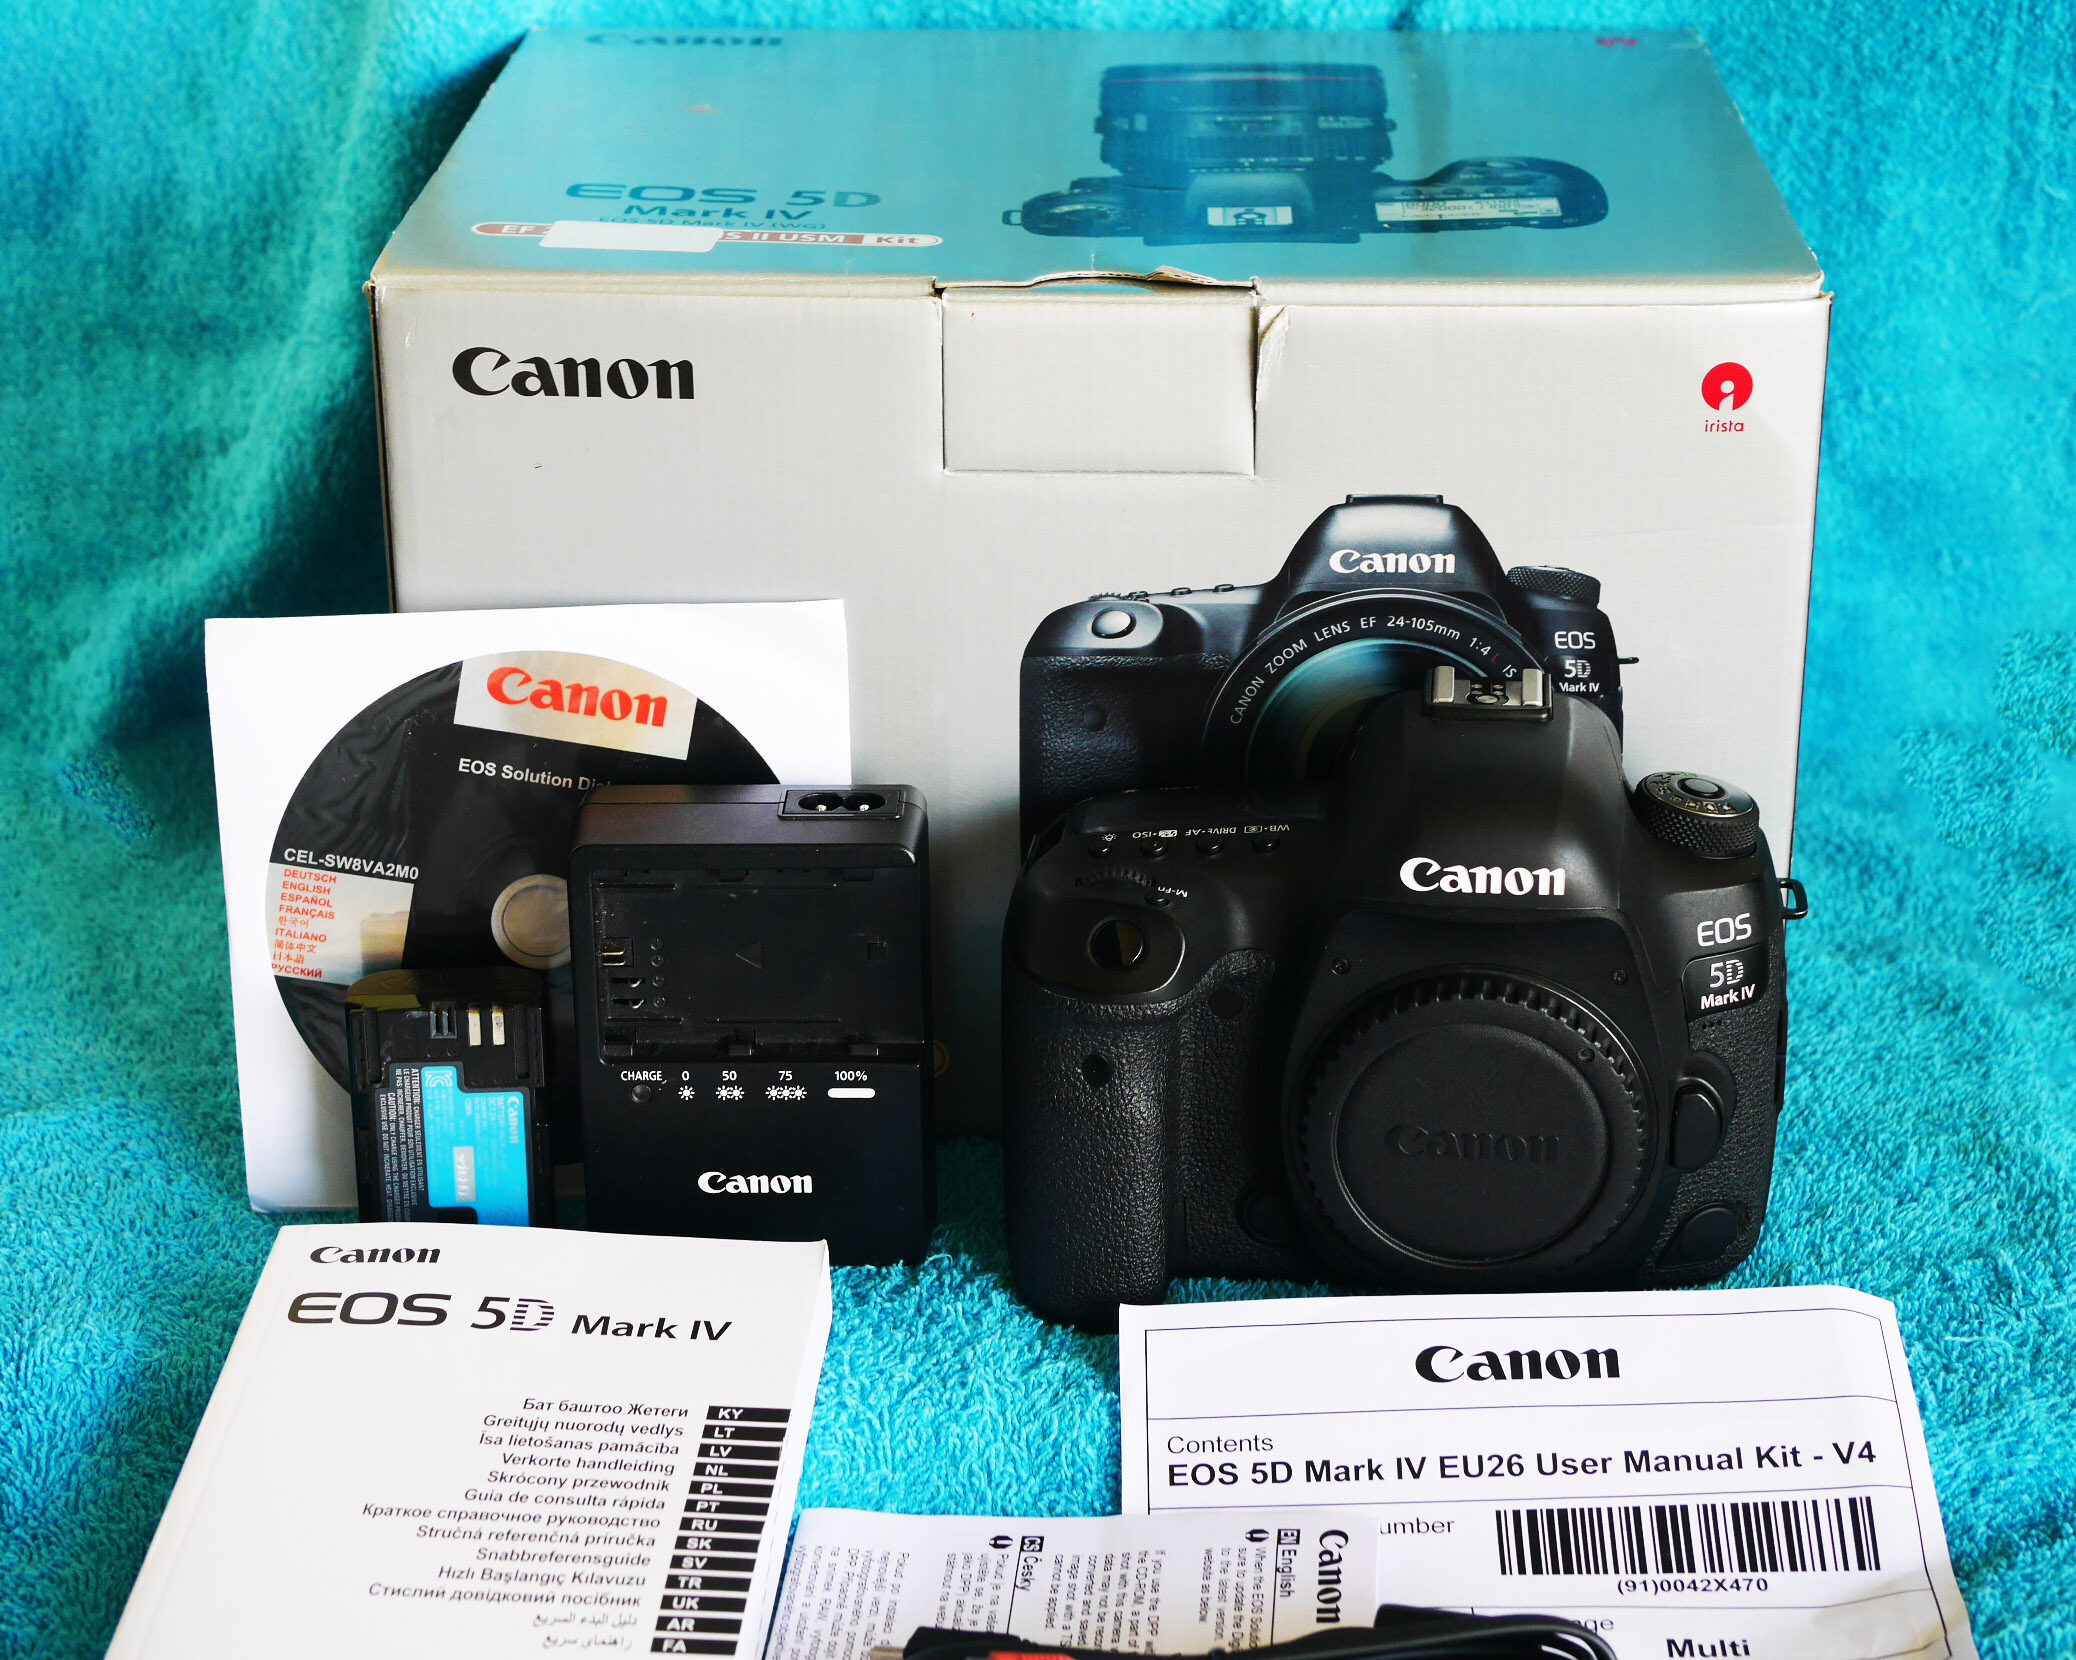 Canon EOS 5D Mark IV 30.4MP DCI 4K Video Professional Full Frame Dual card slots DSLR Camera Black Body in Box,  Built-in Wi-Fi, GPS, NFC, DS126601, ตัวกล้อง 5 D Mark 4 M4 S/n: 333037003888